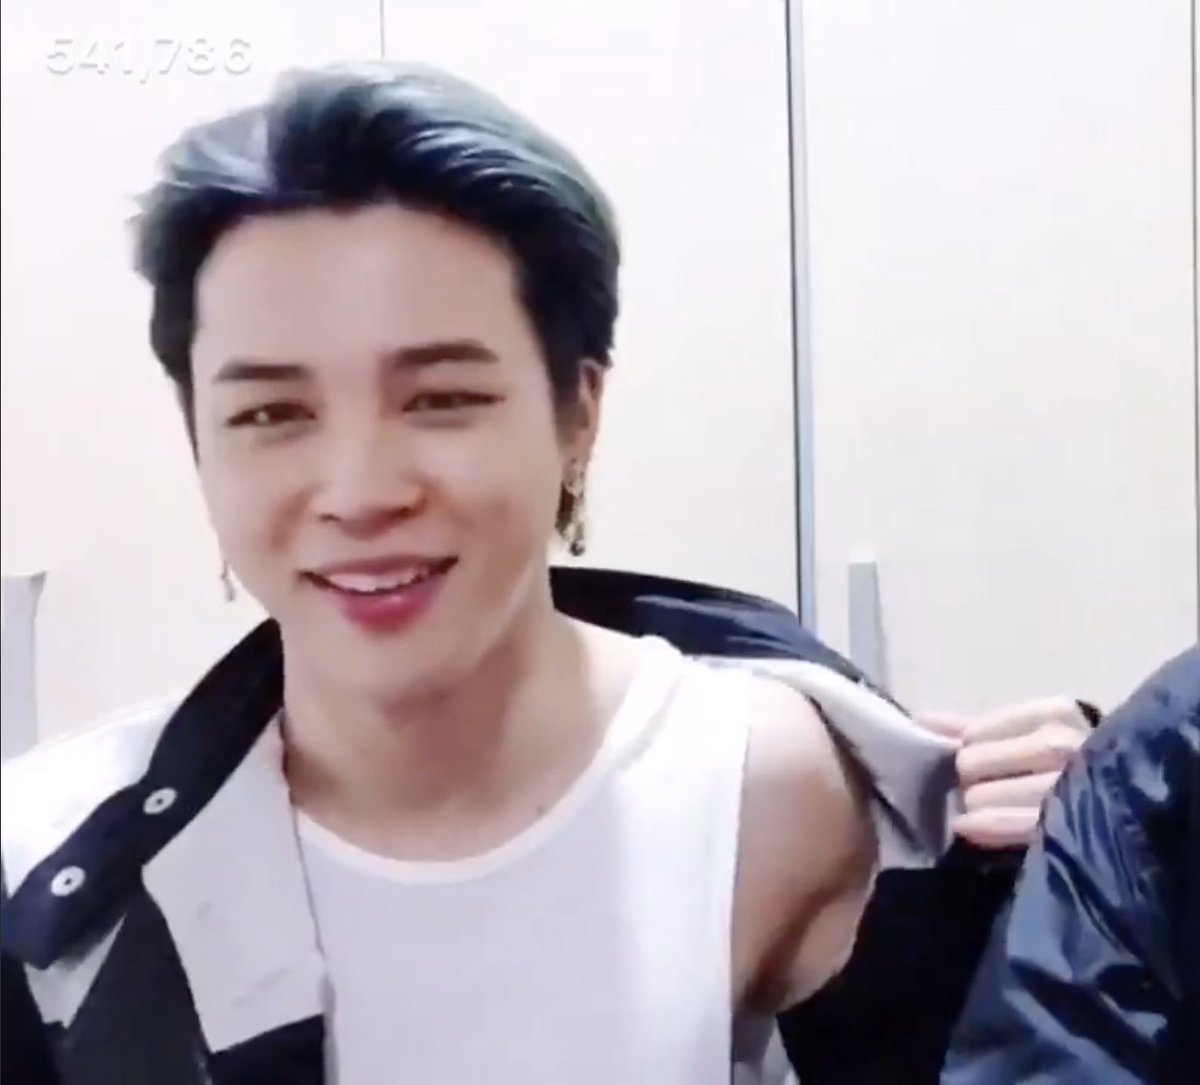 PARK JIMIN!!! You simply cannot contain Sassy Left Shoulder, we know this to be true!!!  #JIMIN  #BTS    #BTSARMY    @BTS_twt